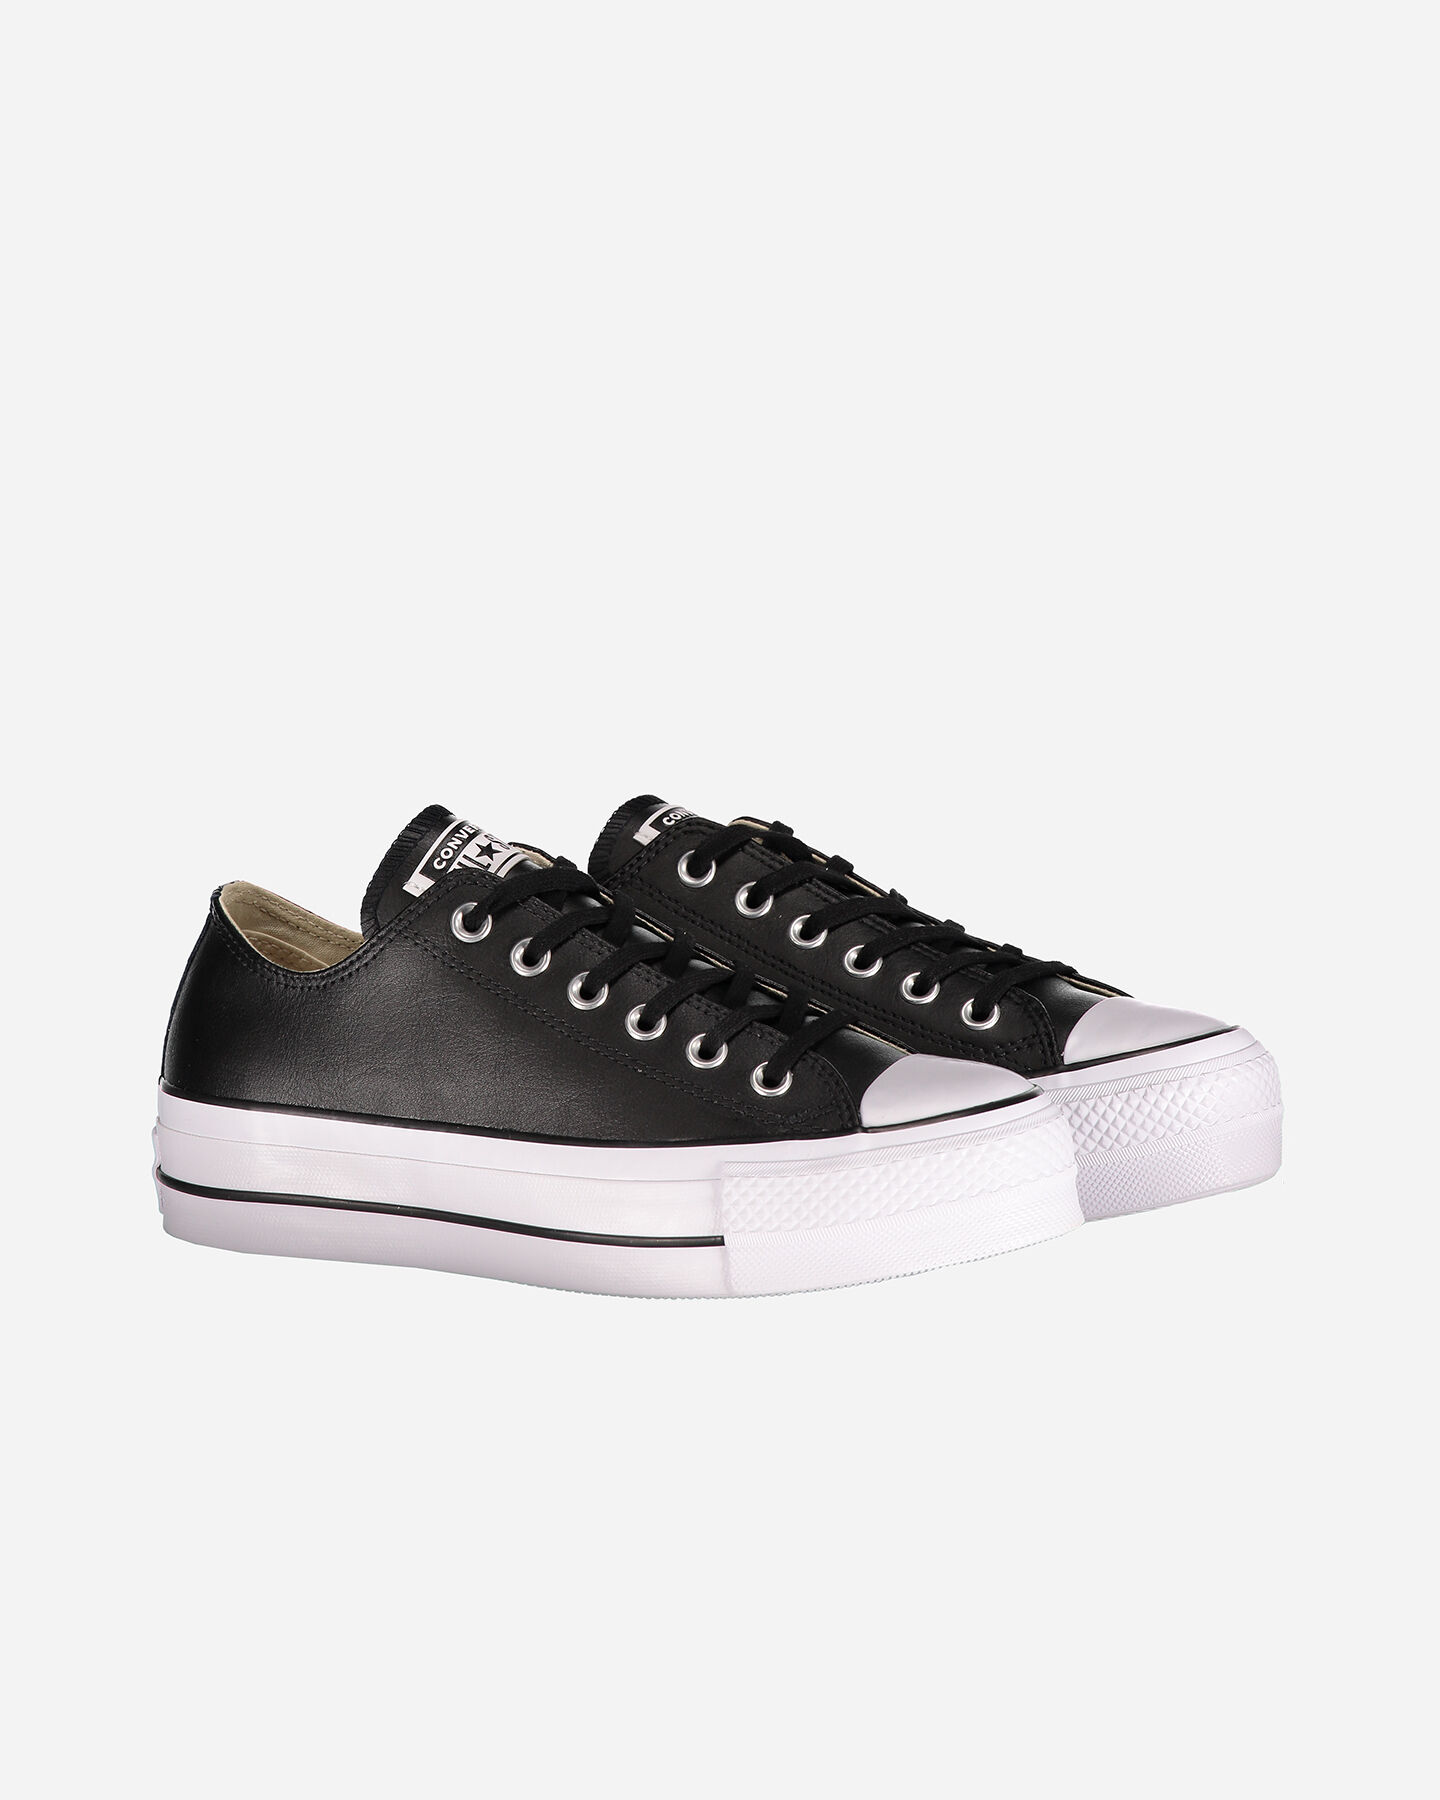  Scarpe sneakers CONVERSE ALL STAR PLATFORM LEATHER OX W S4051916|1|10,5 scatto 1